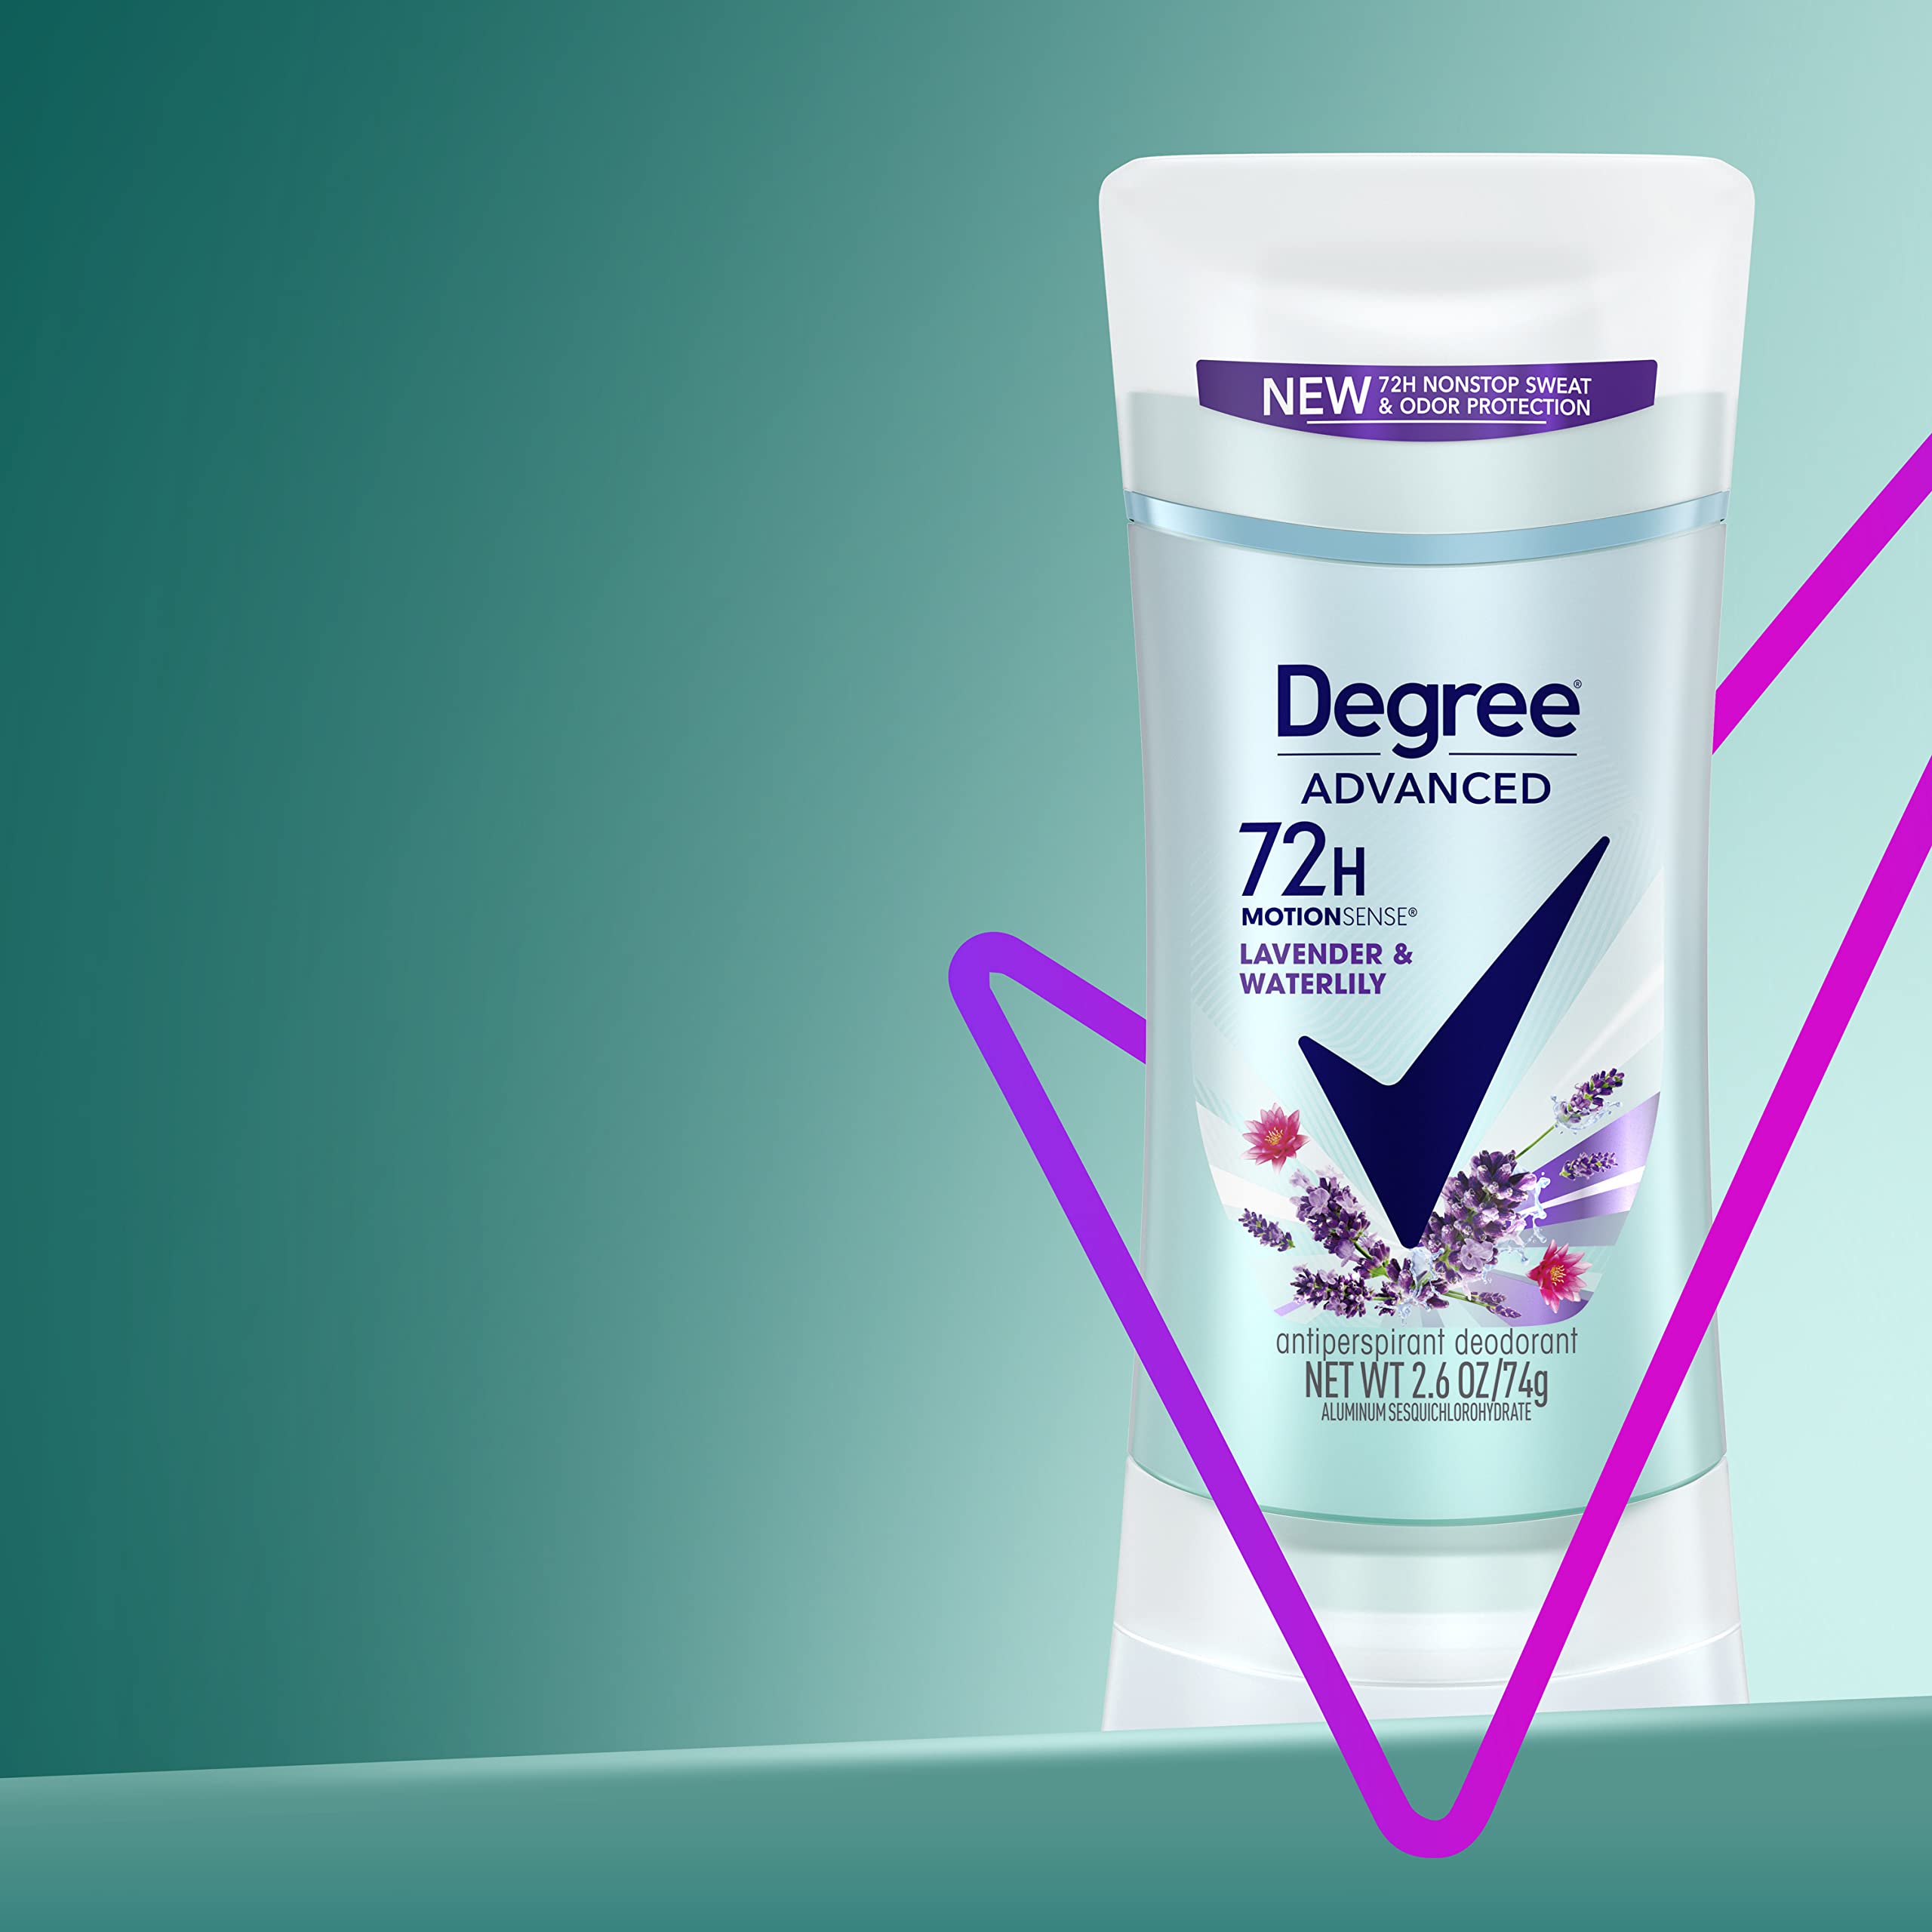 Degree Antiperspirant Deodorant 72-Hour Sweat and Odor Protection Lavender and Waterlily Antiperspirant for Women with MotionSense Technology 2.6 oz 4 Count